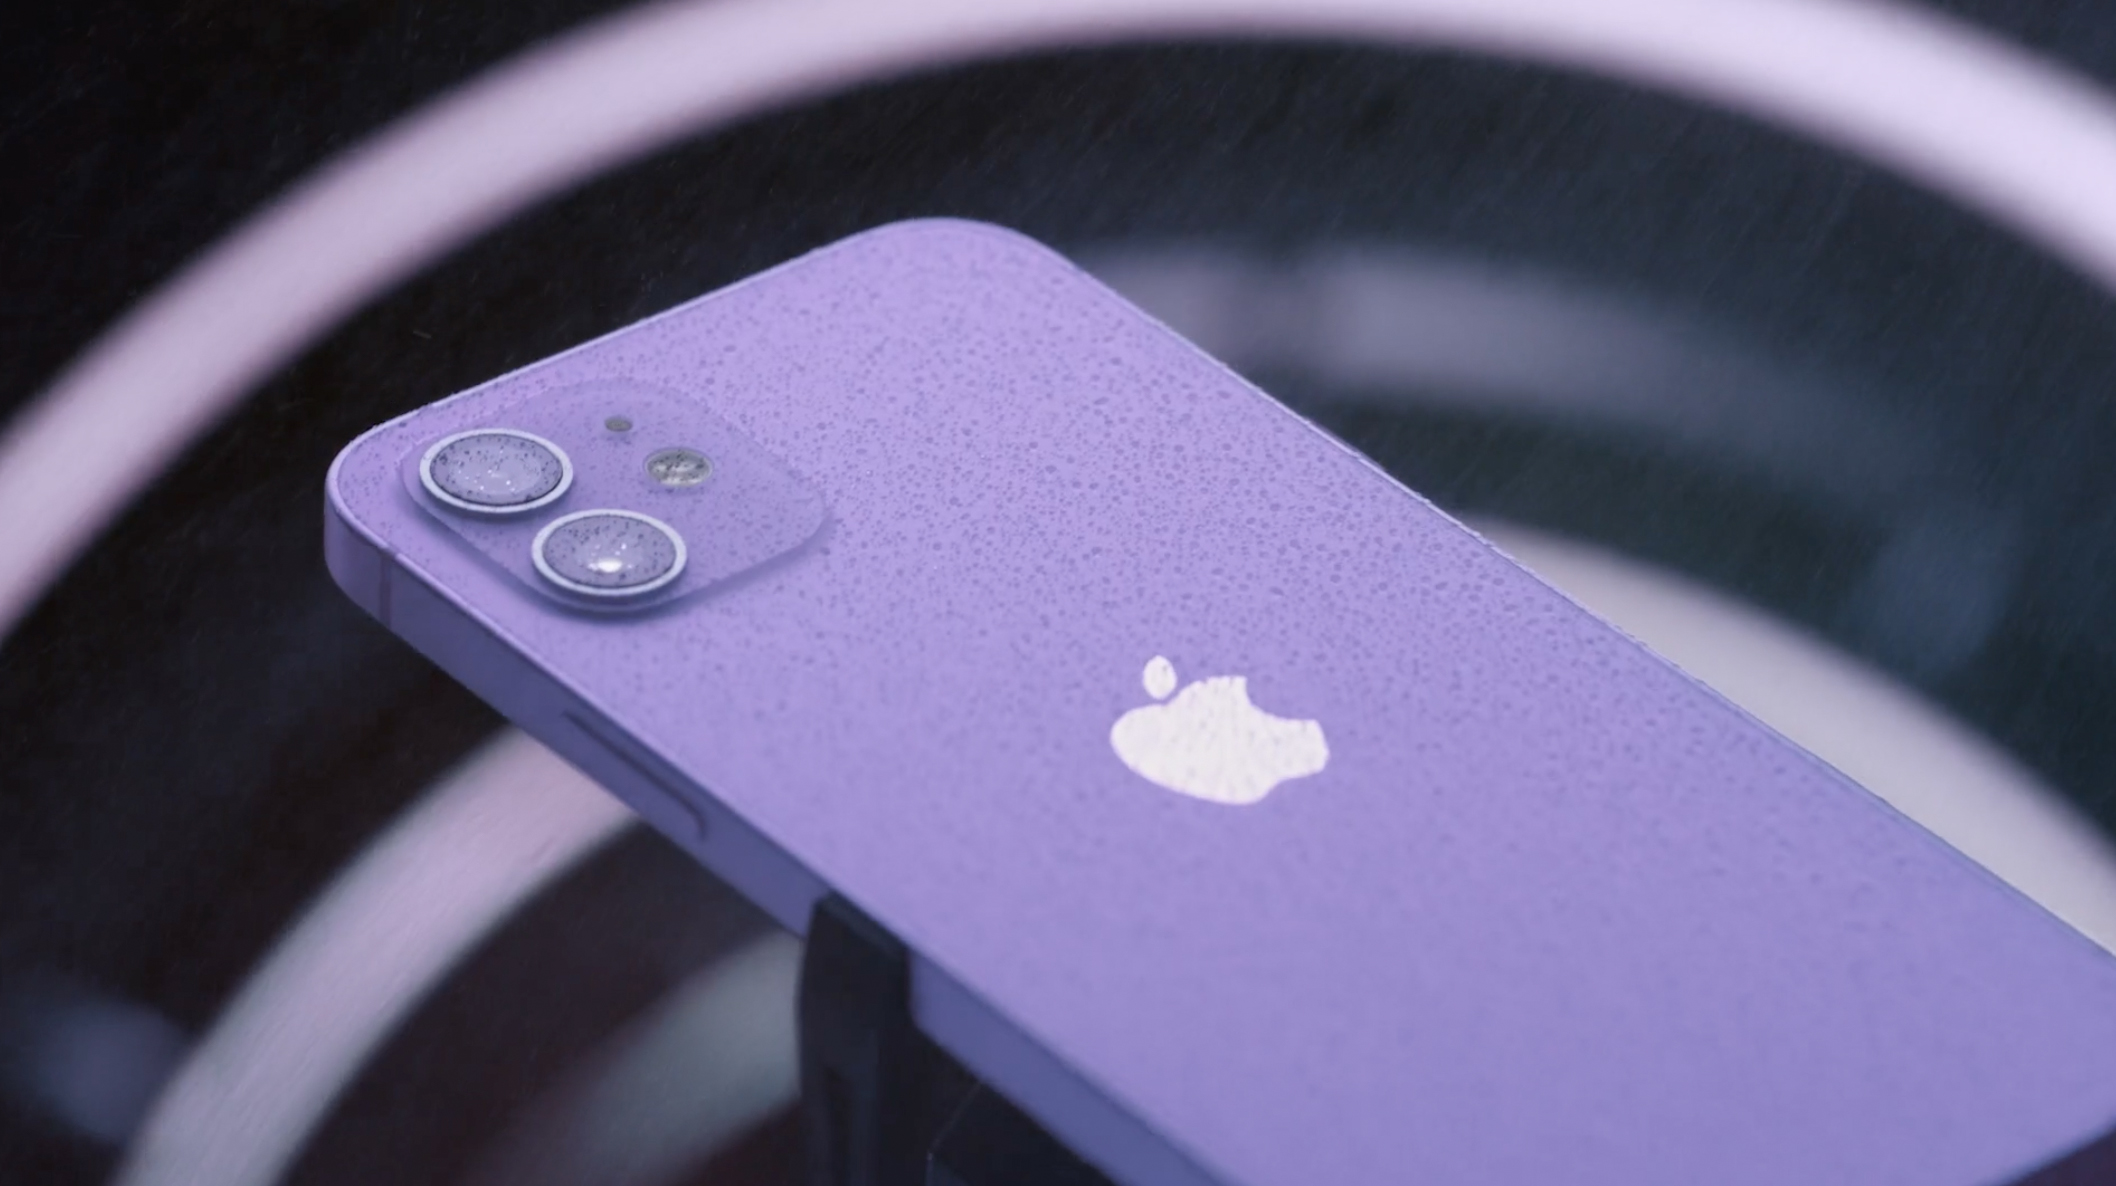 Purple iphone wallpaper is now available â heres how to grab it toms guide